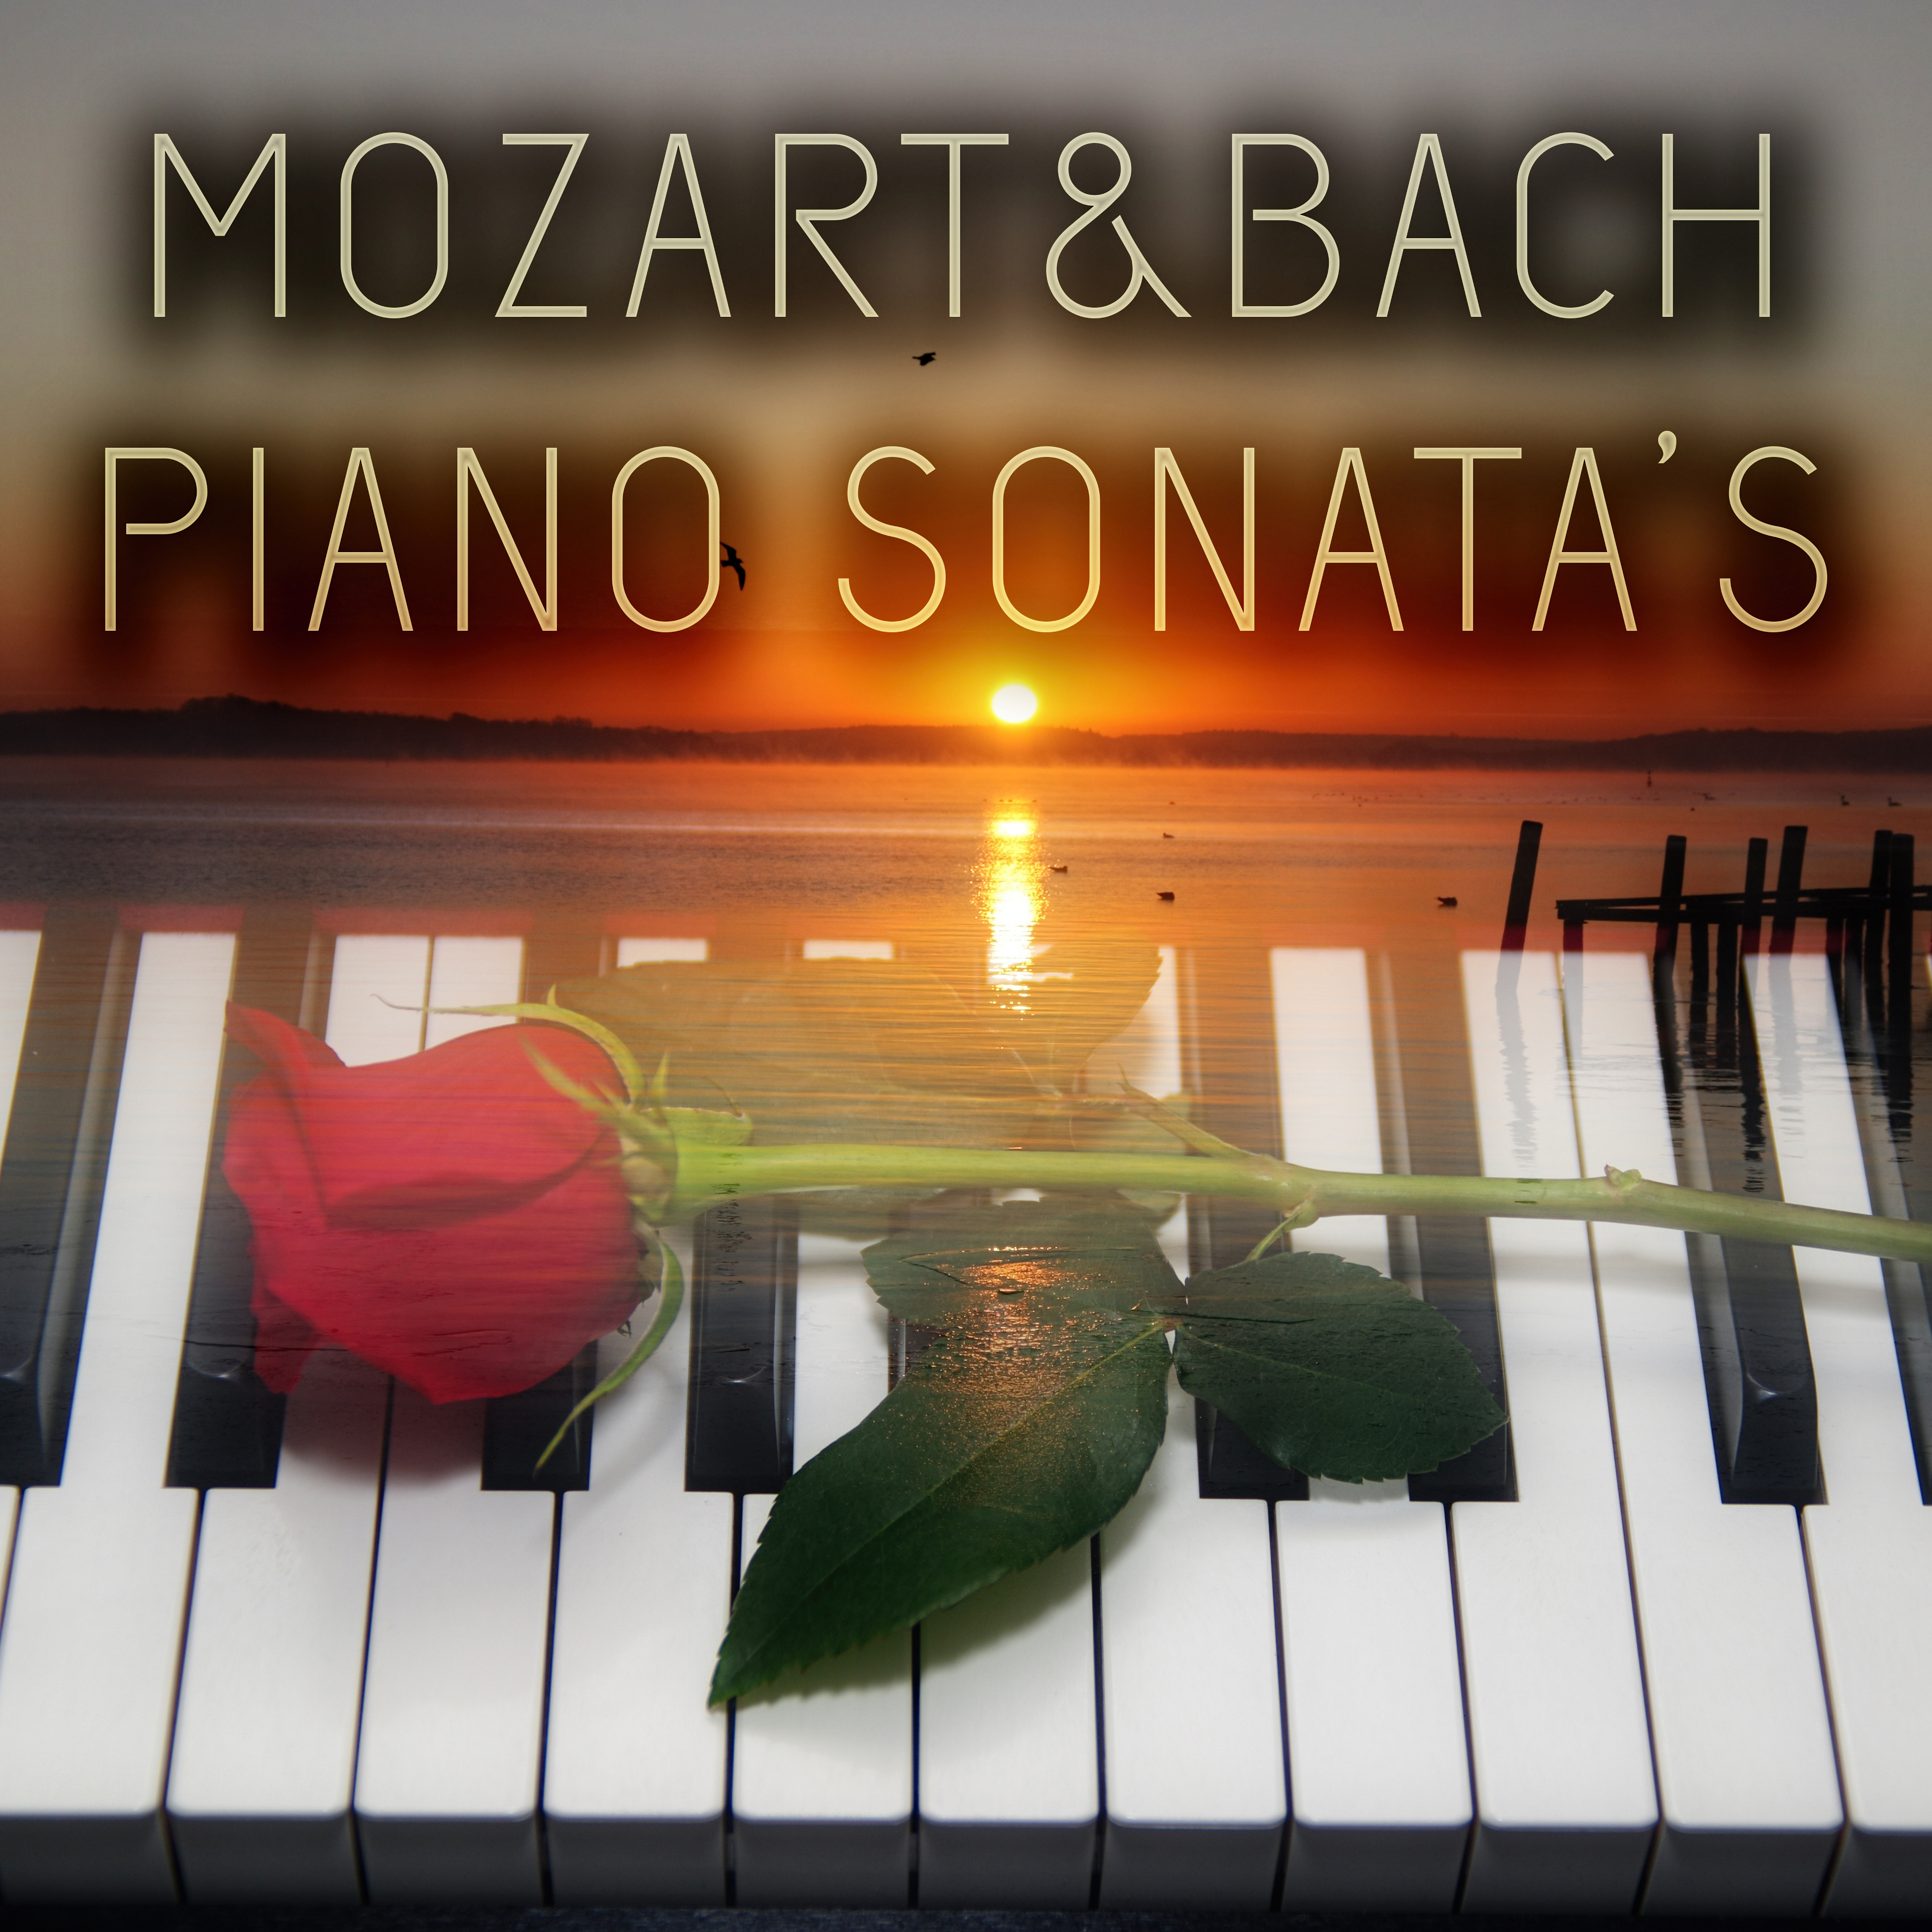 The 50 Best Pieces of Classical Piano Music - Most Beautiful Mozart & Bach Piano Sonatas